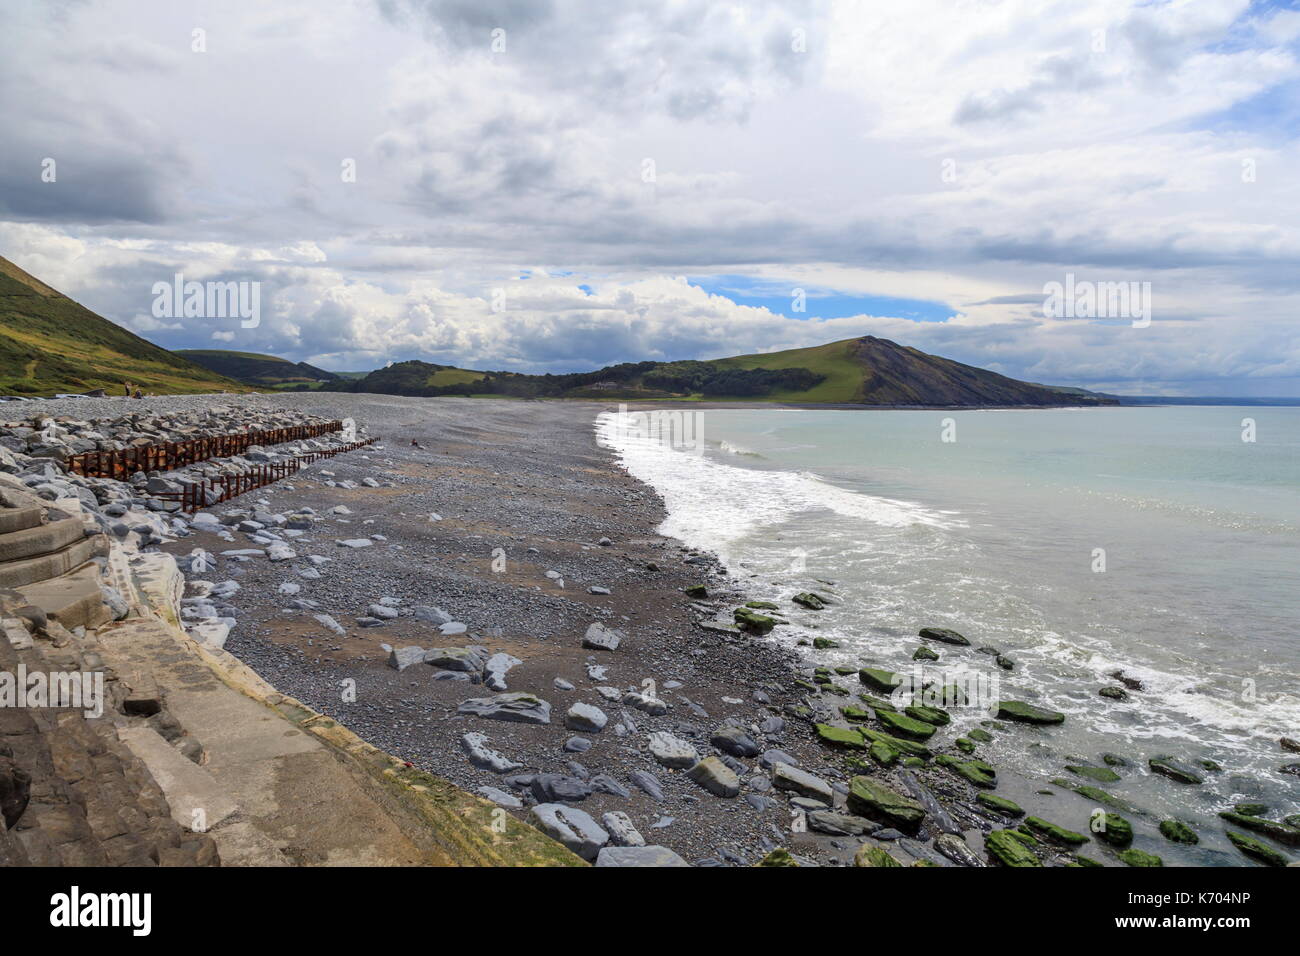 Tanybwlch High Resolution Stock Photography and Images - Alamy